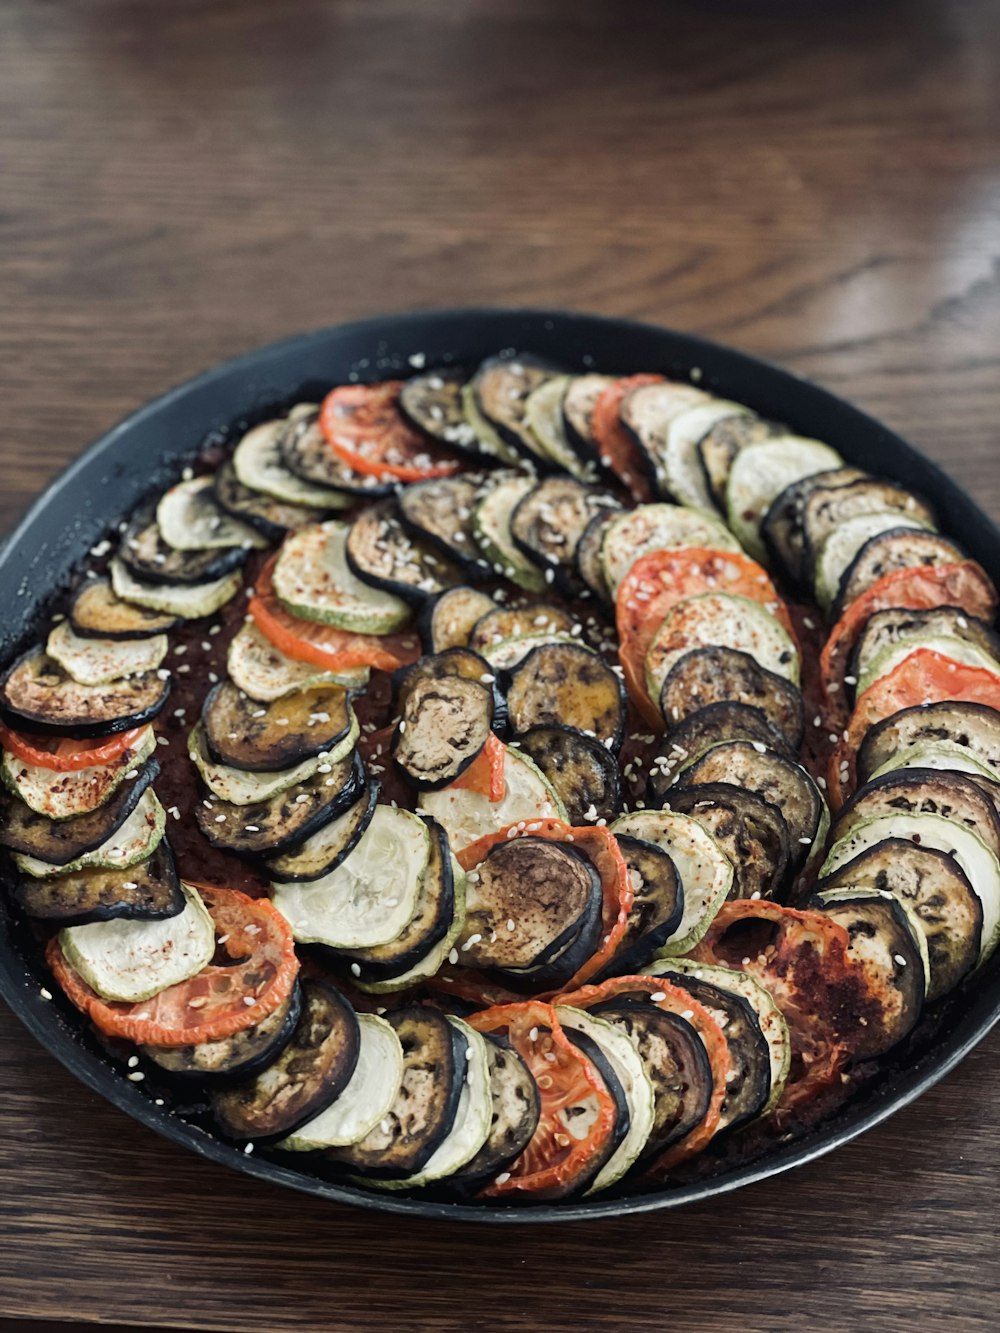 a pan filled with sliced up vegetables on top of a wooden table